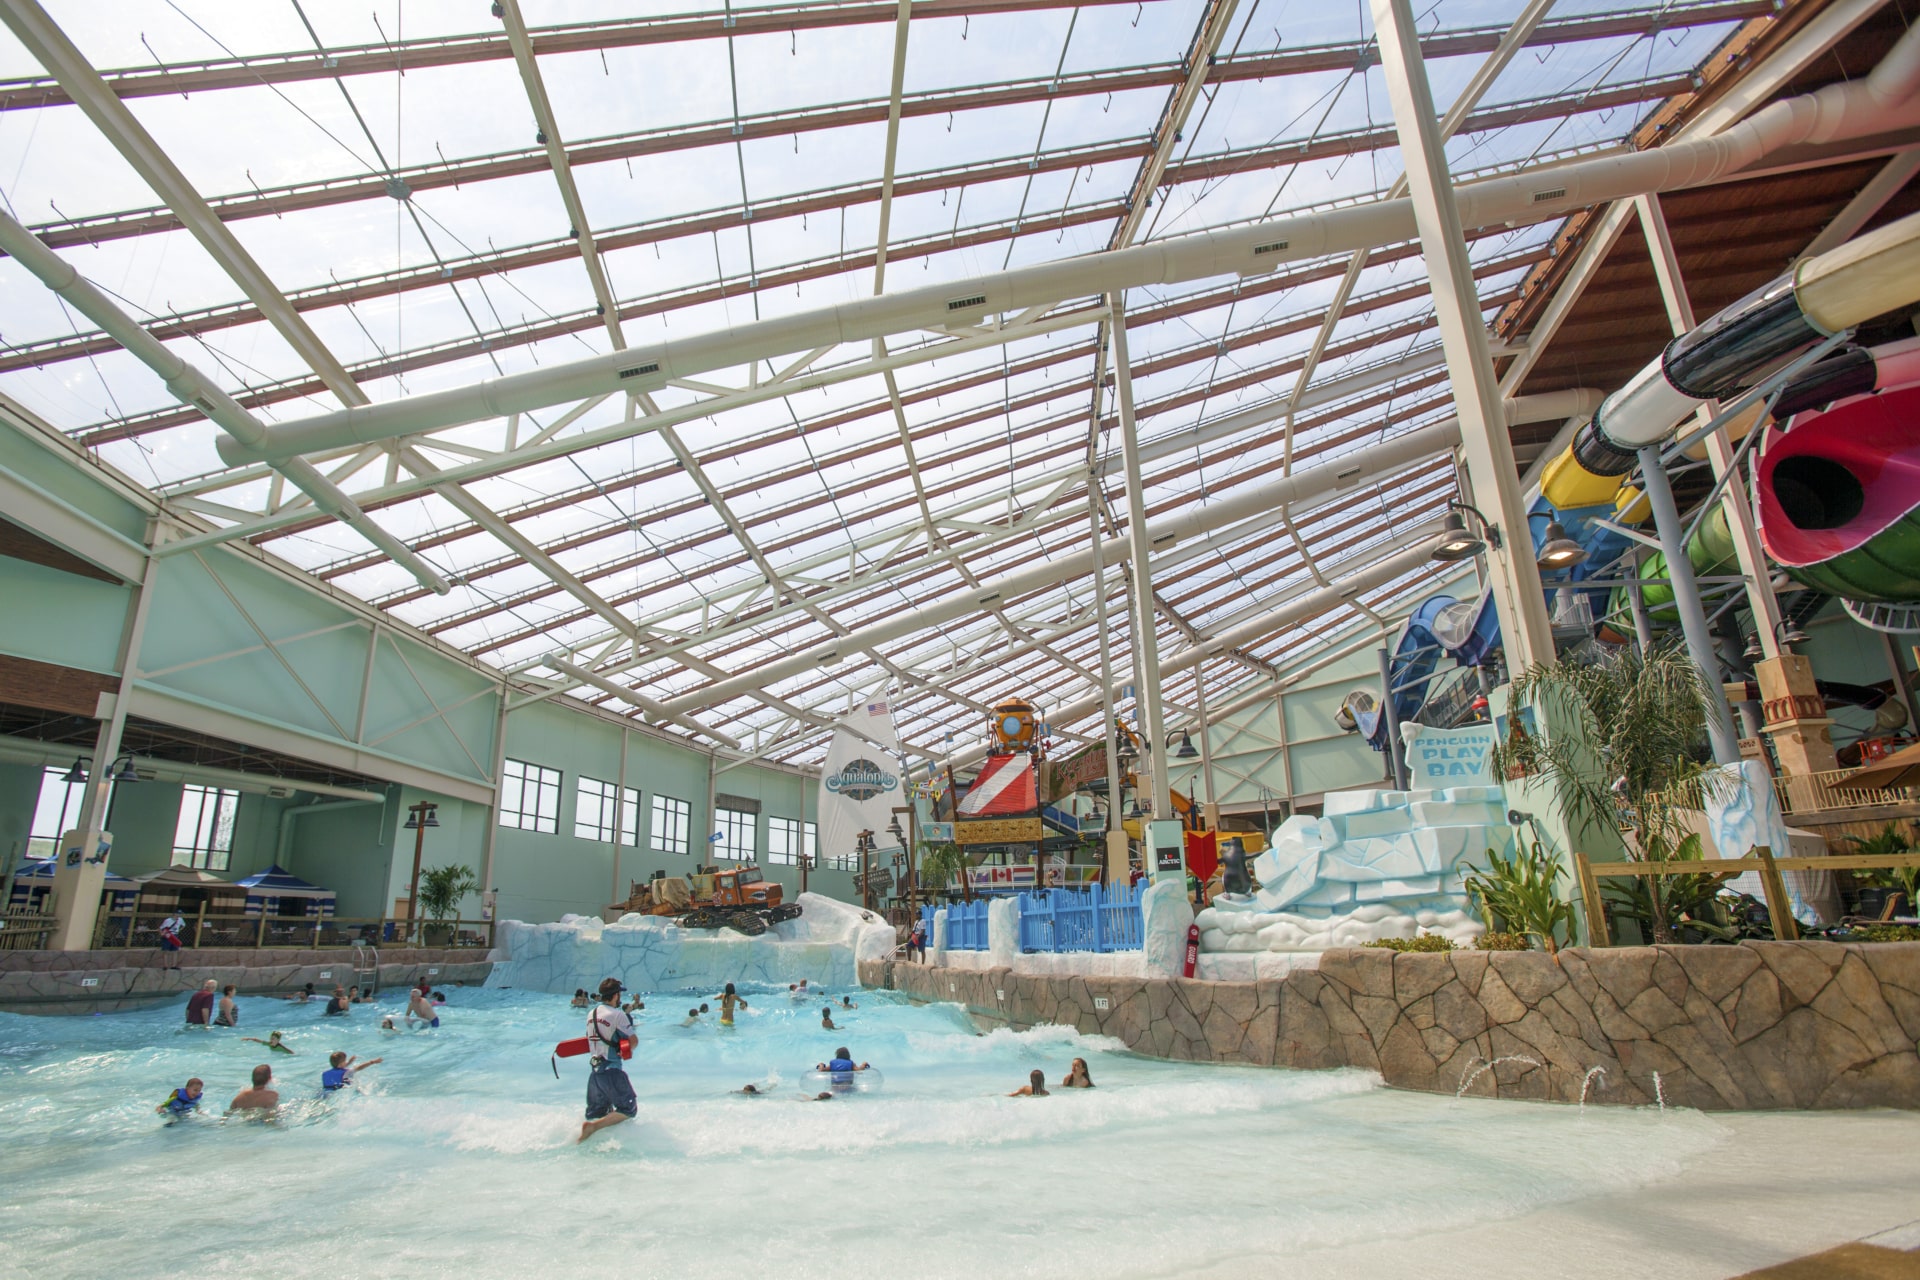 Visitors enjoying the controlled climate in the wave pool.
